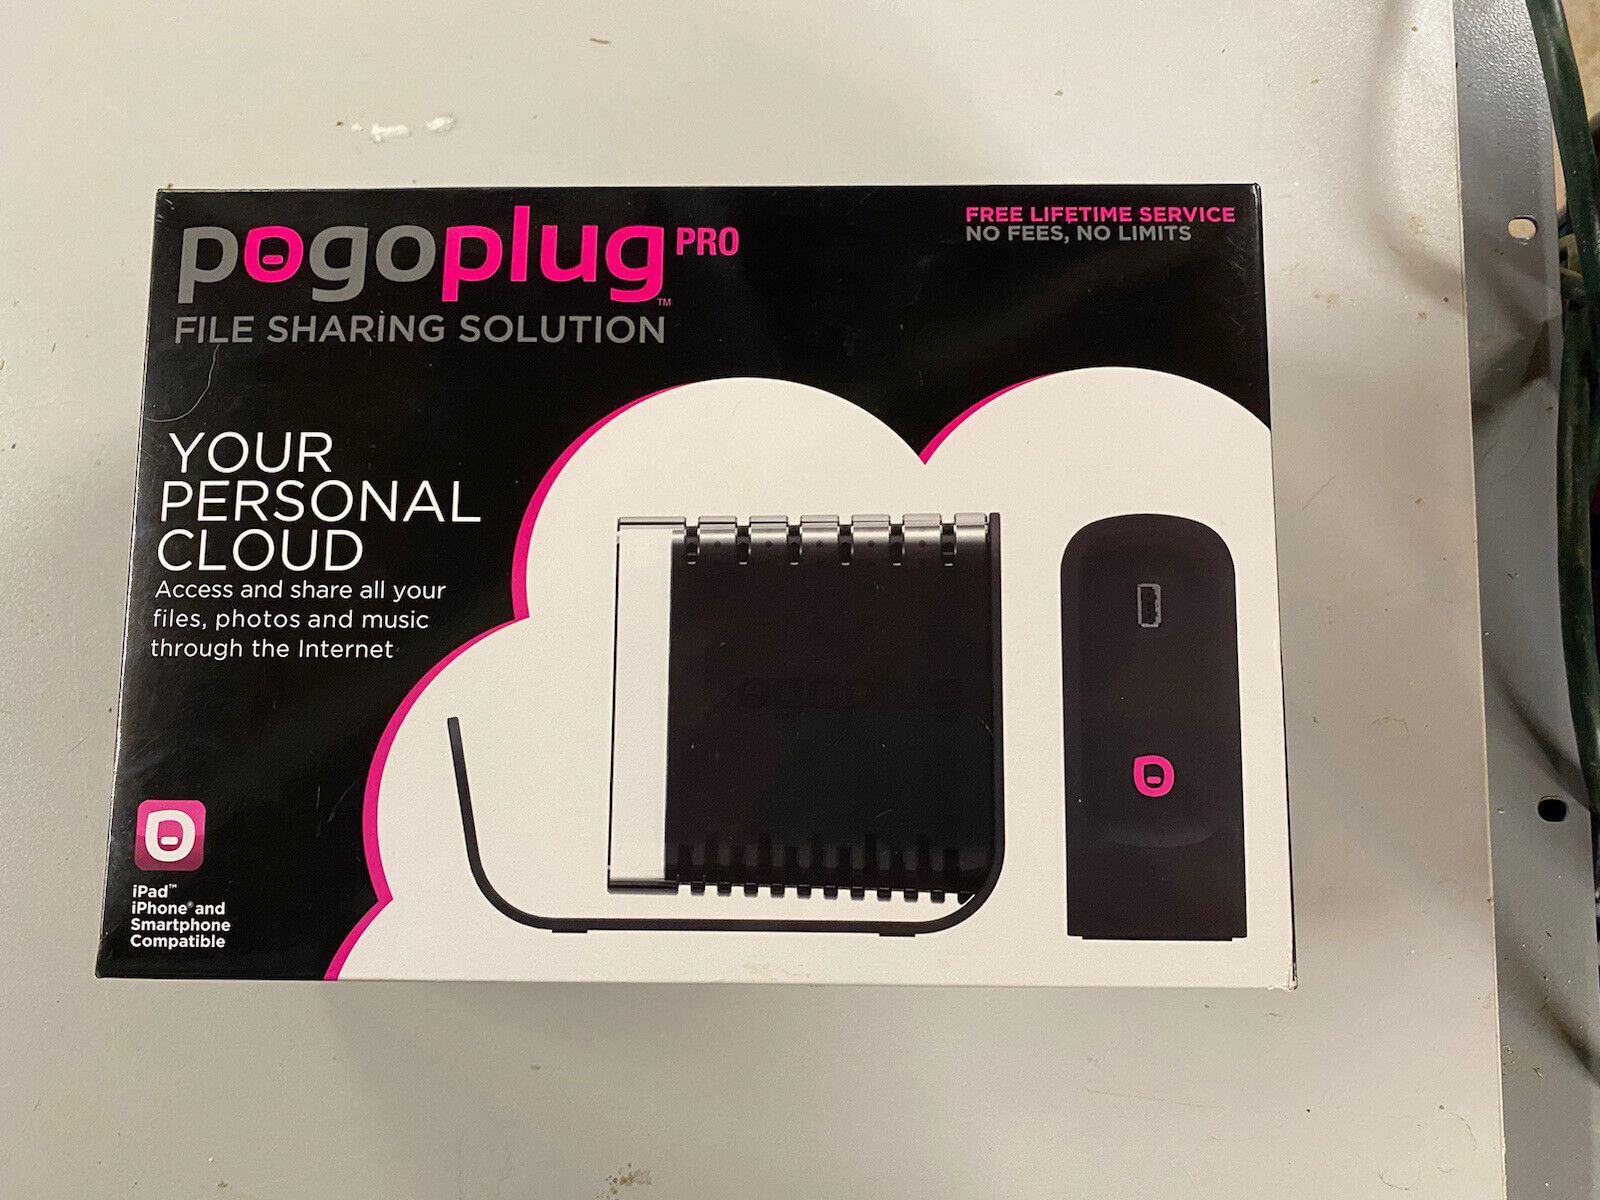 Pogoplug Media Sharing Device - Remote Access to Your Media - Black